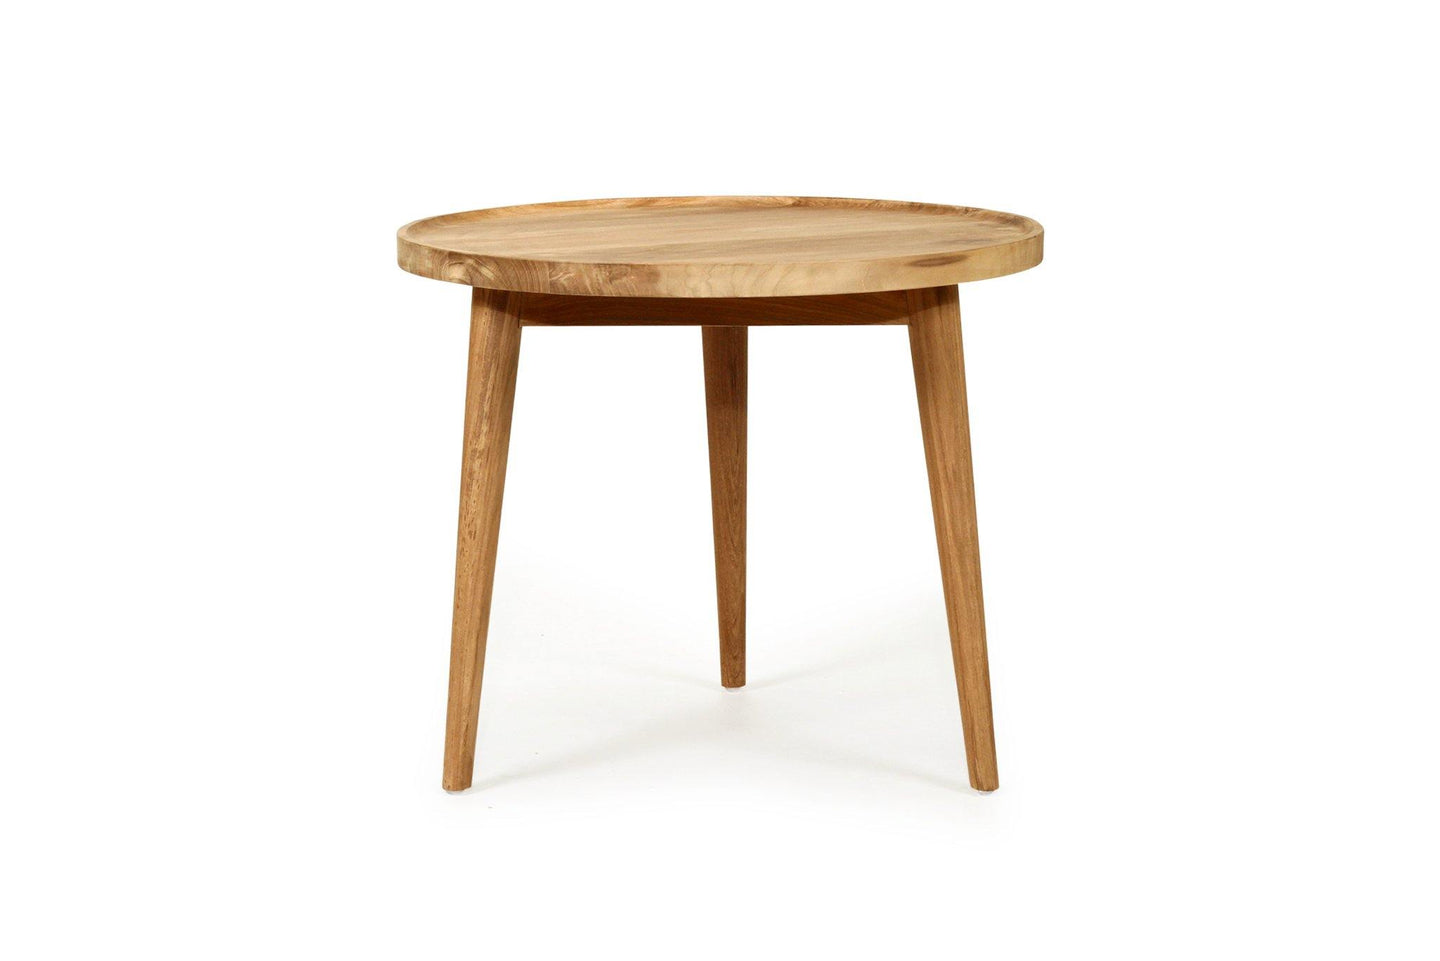 Lounge Styles Abide Interiors Burleigh High Grade Teak Side Table - Indoor/Outdoor Undercover Use